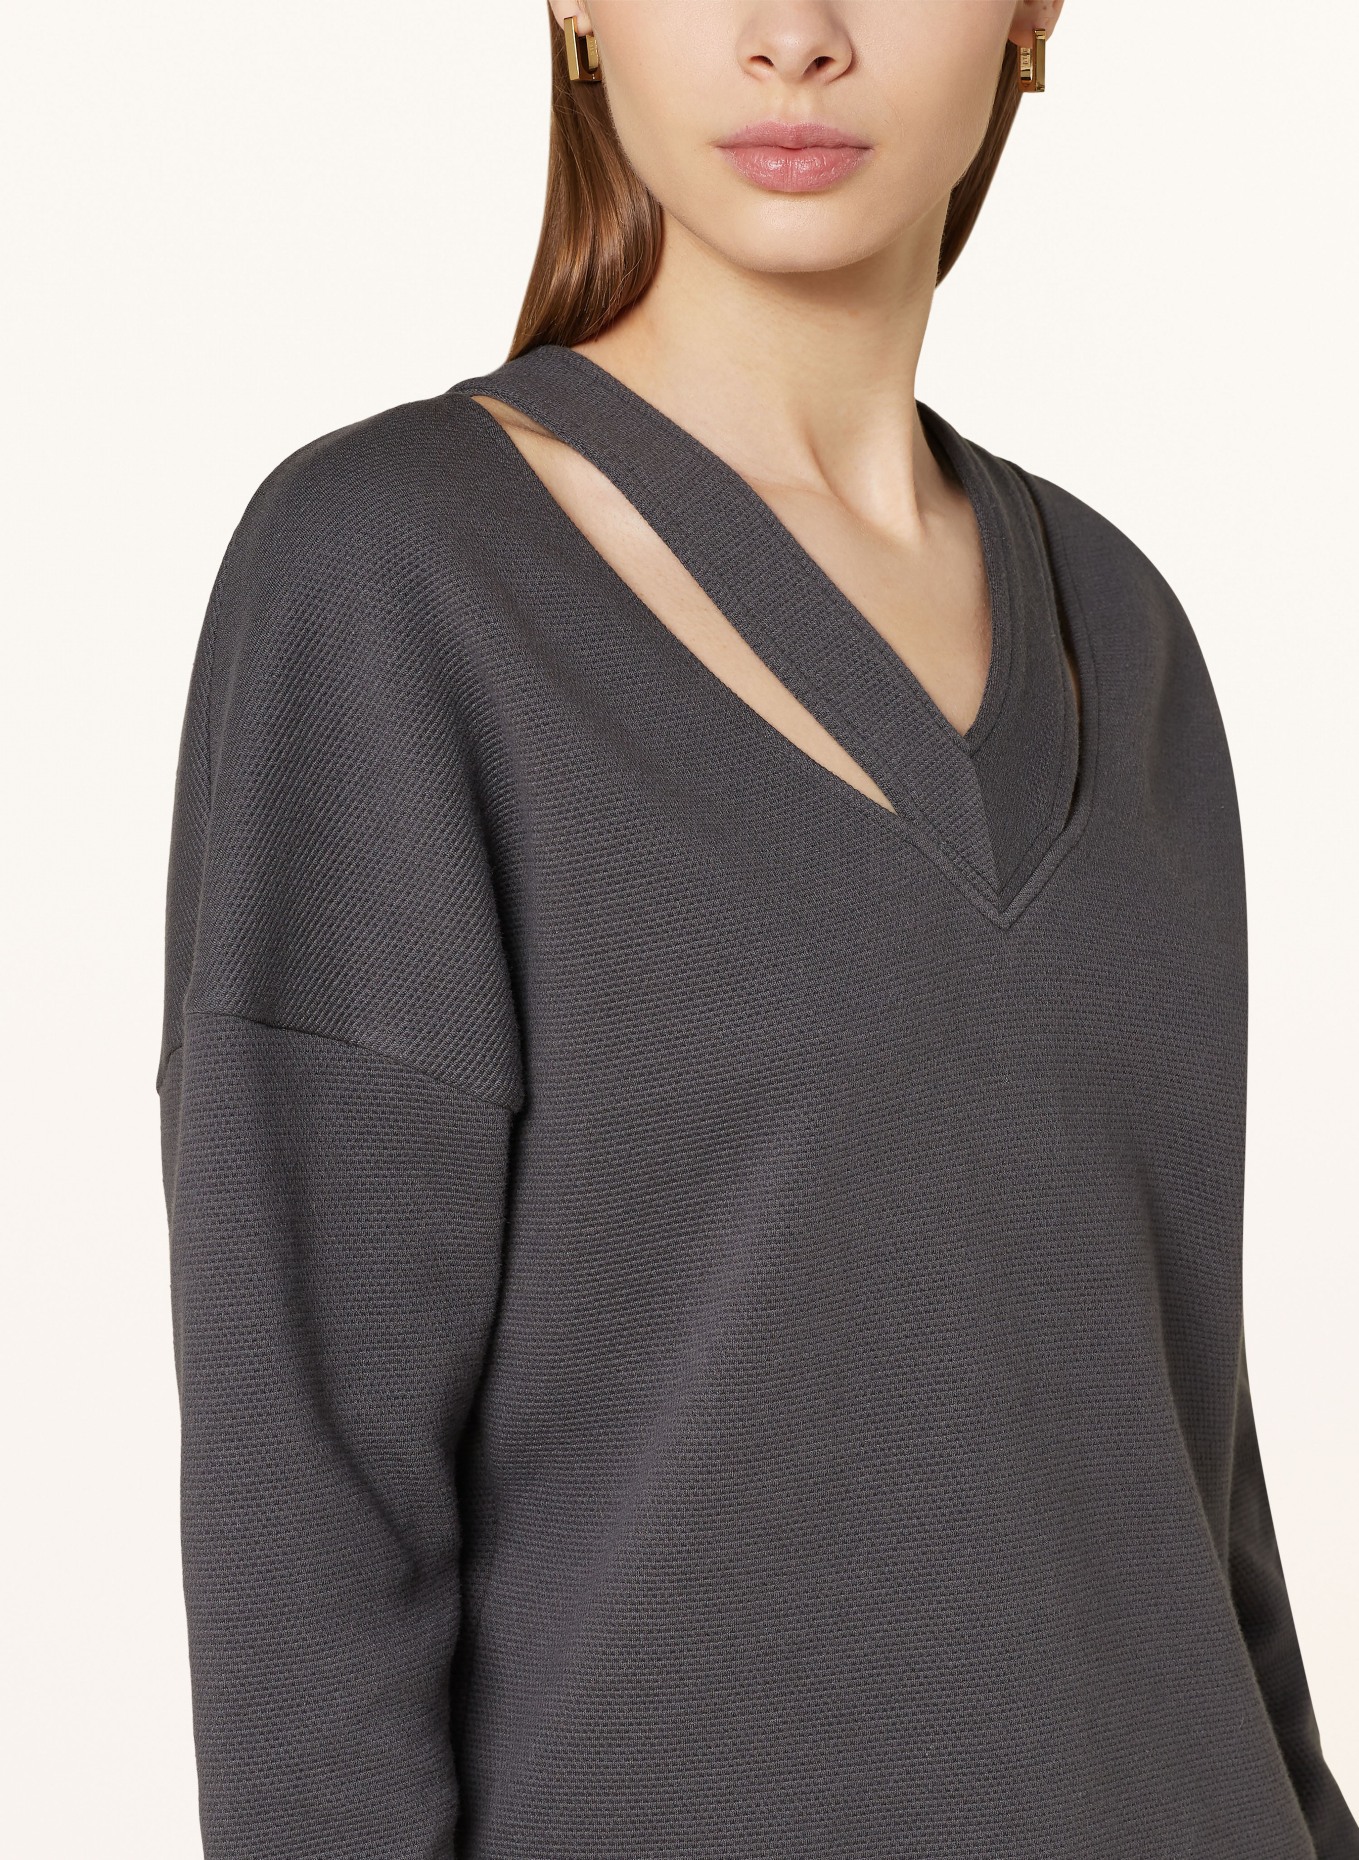 VANILIA Sweater with cut-out, Color: DARK GRAY (Image 4)